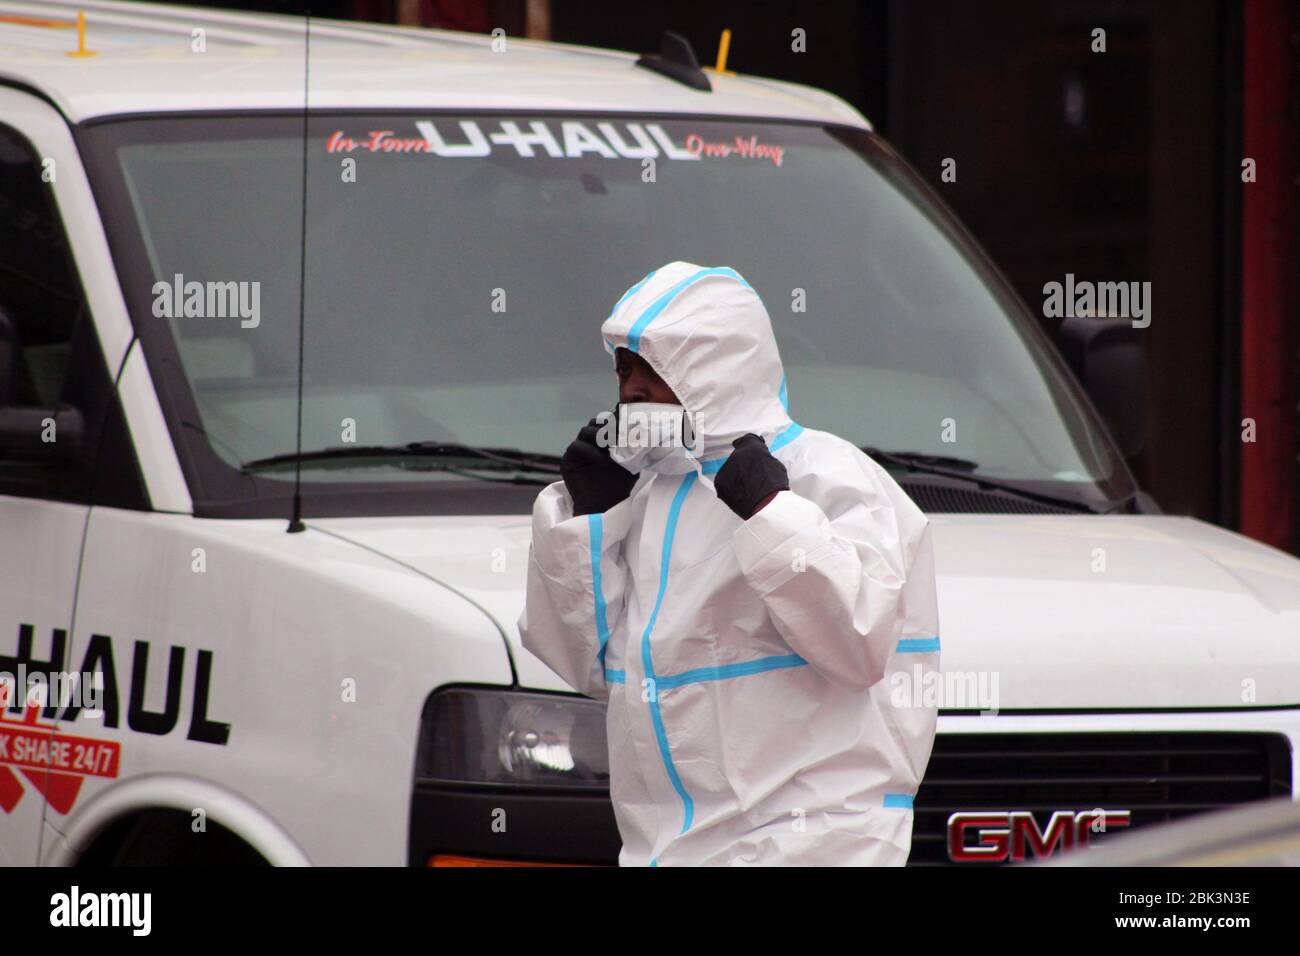 New York, New York, USA. 30th Apr, 2020. This man dressed in a hazmat suit, phone in hand, walks past a U-Haul truck along the Andrew T. Cleckley Funeral Home in Brooklyn where bodies not properly cared are removed. 60 bodies were stored in 4 rented non-refrigerated vehicles including the U-Haul one lining the street along stores. Neighbors reported a foul smell and fluids dripping from the trucks. In New York City alone, there have been almost 13,000 COVID-19 deaths. Credit: Marie Le Ble/ZUMA Wire/Alamy Live News Stock Photo